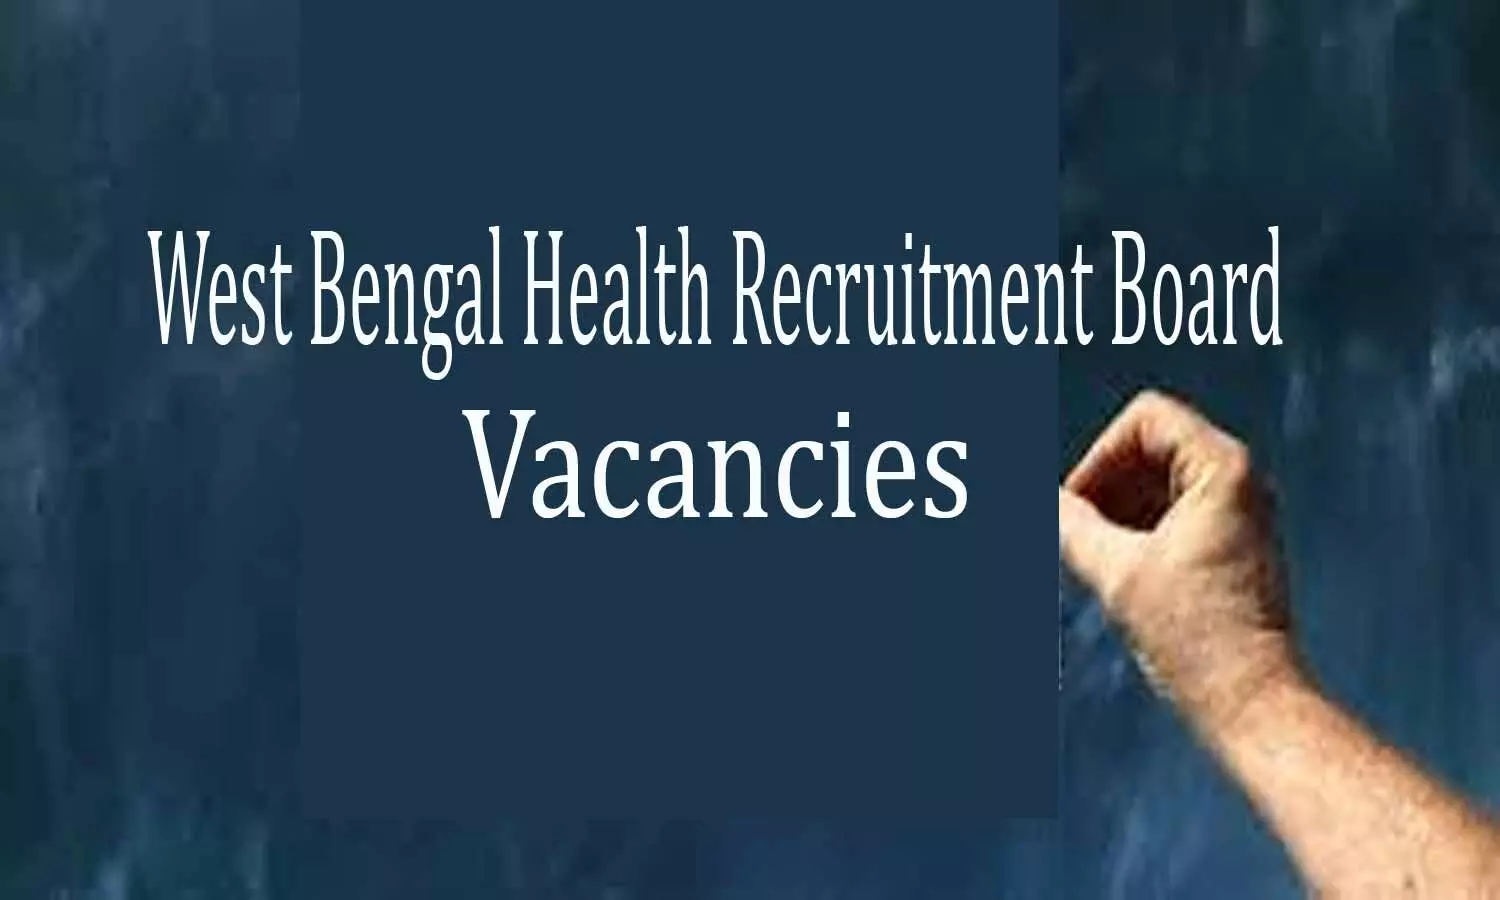 APPLY NOW: West Bengal Health Recruitment Board Releases 1341 Vacancies For Specialist Post